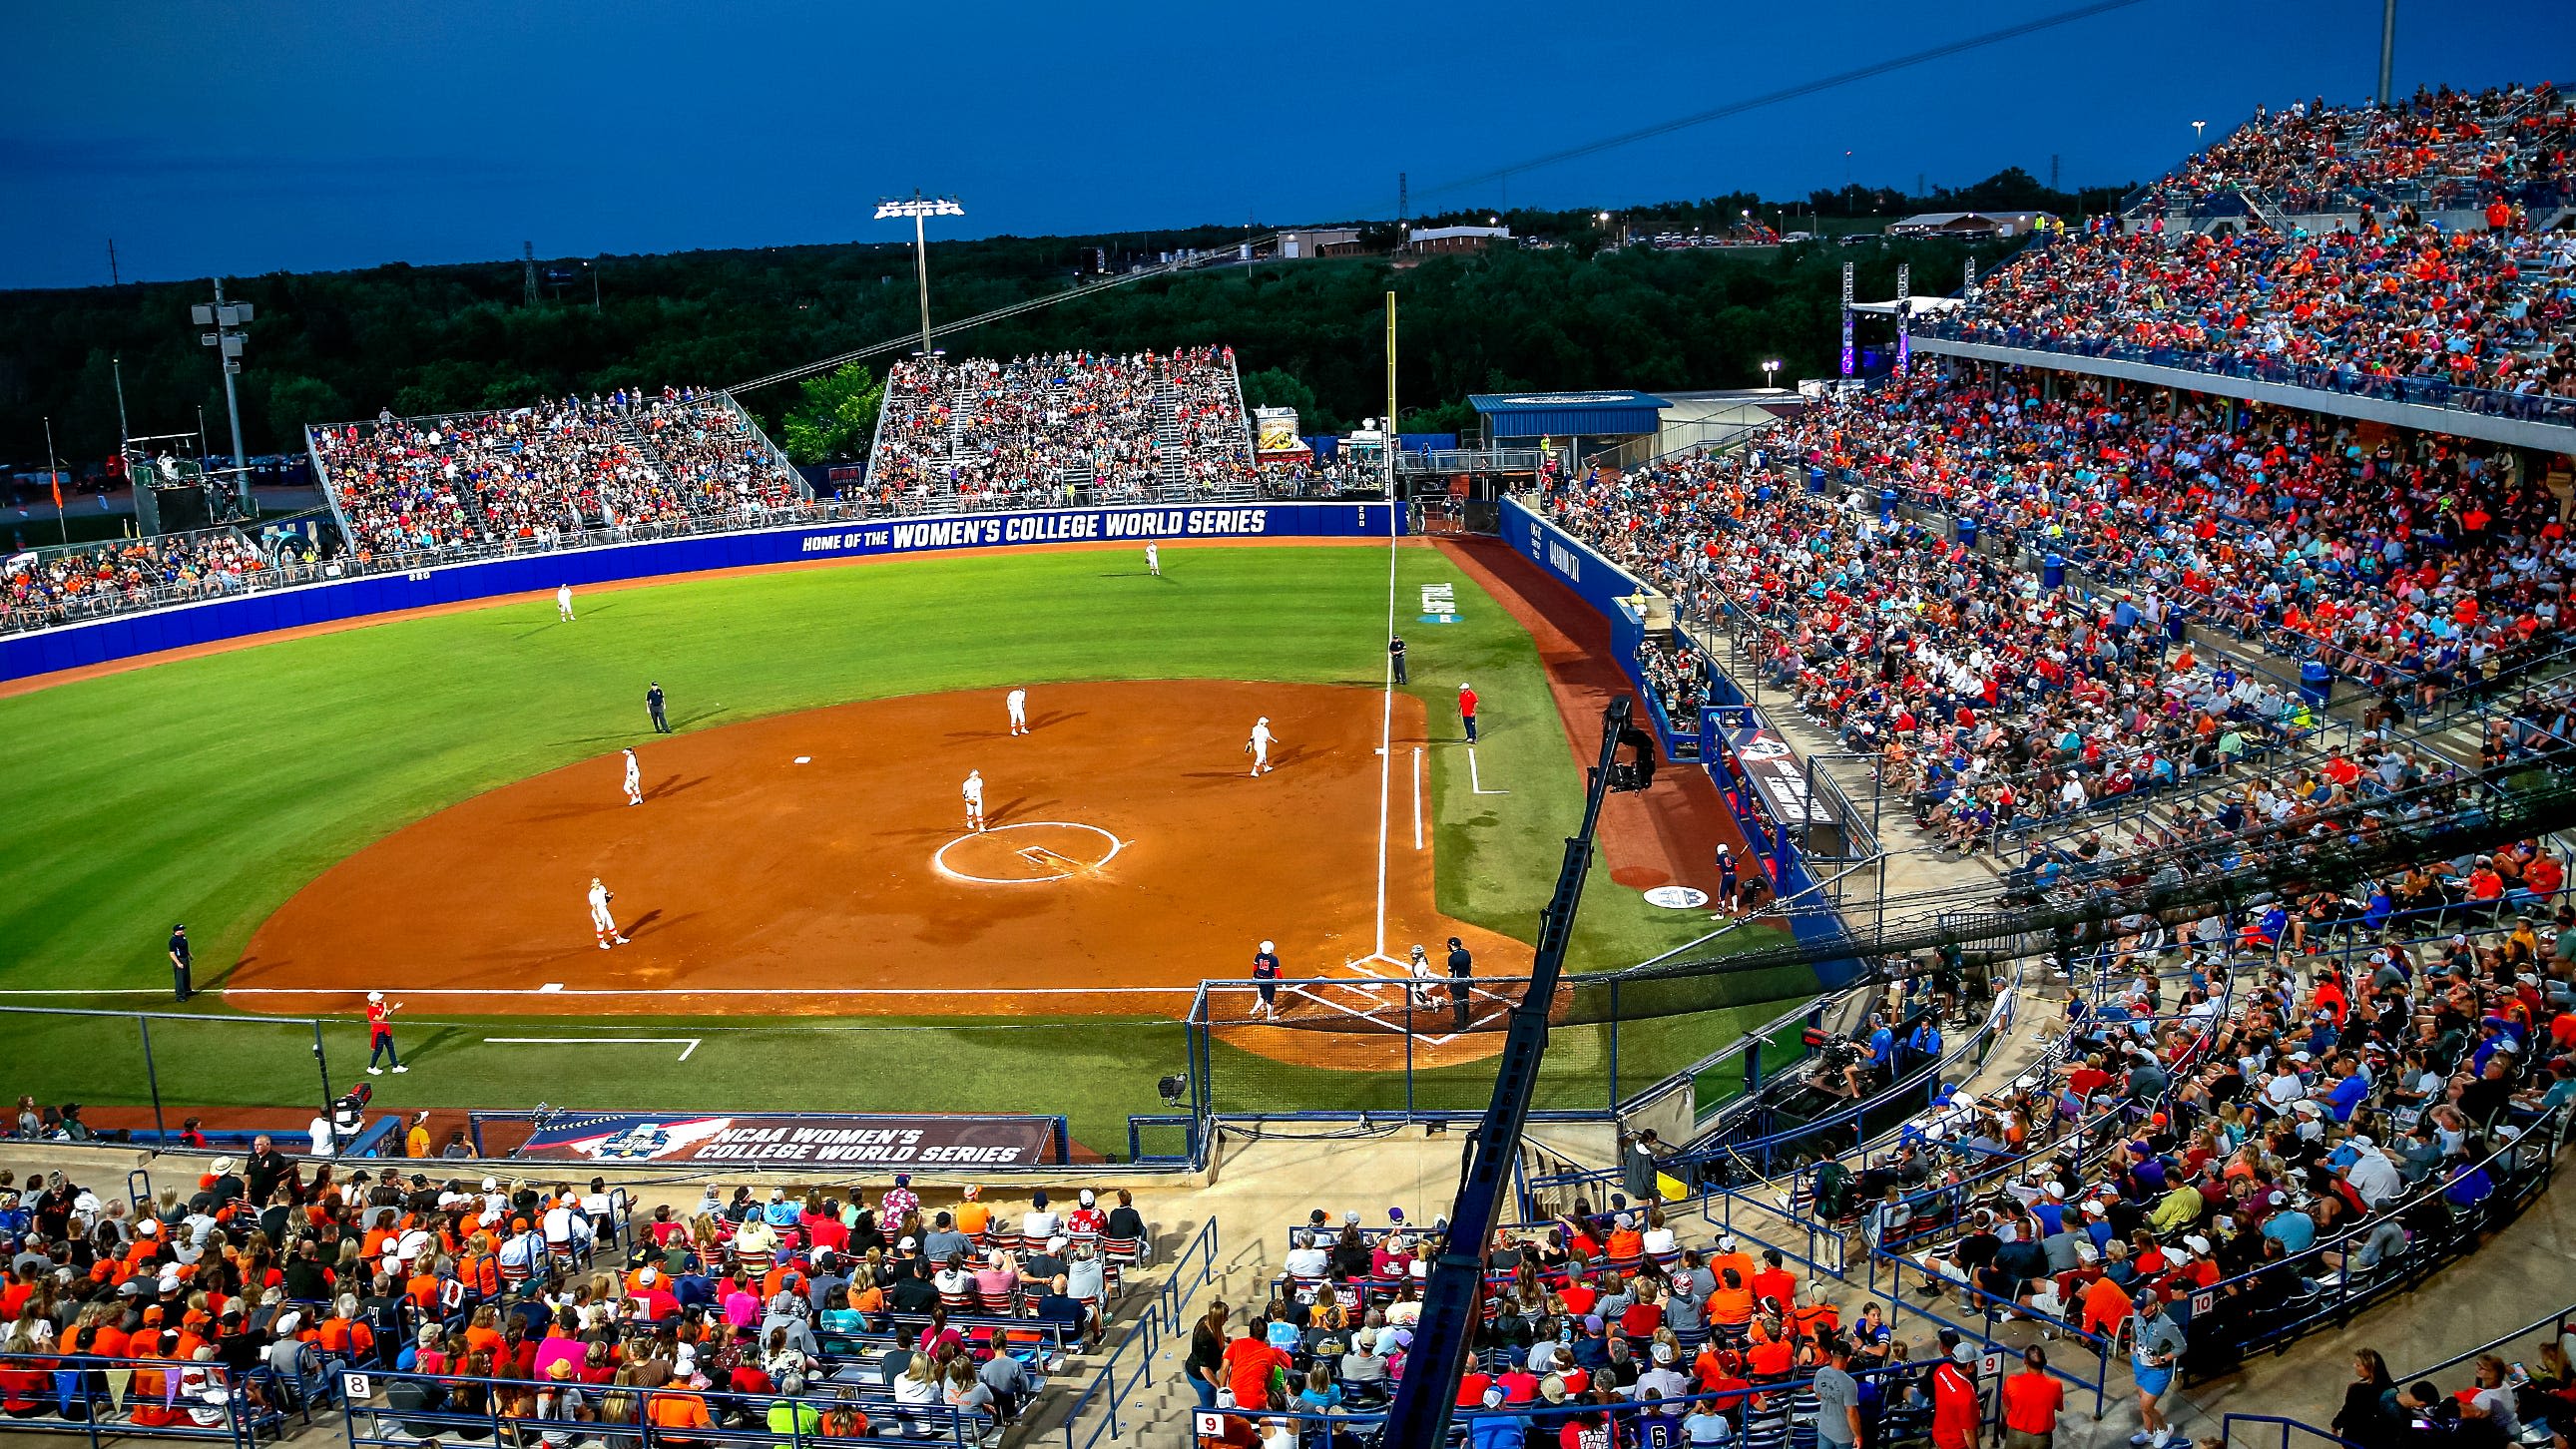 Why is Women's College World Series in Oklahoma City? WCWS held at Devon Park since 1990